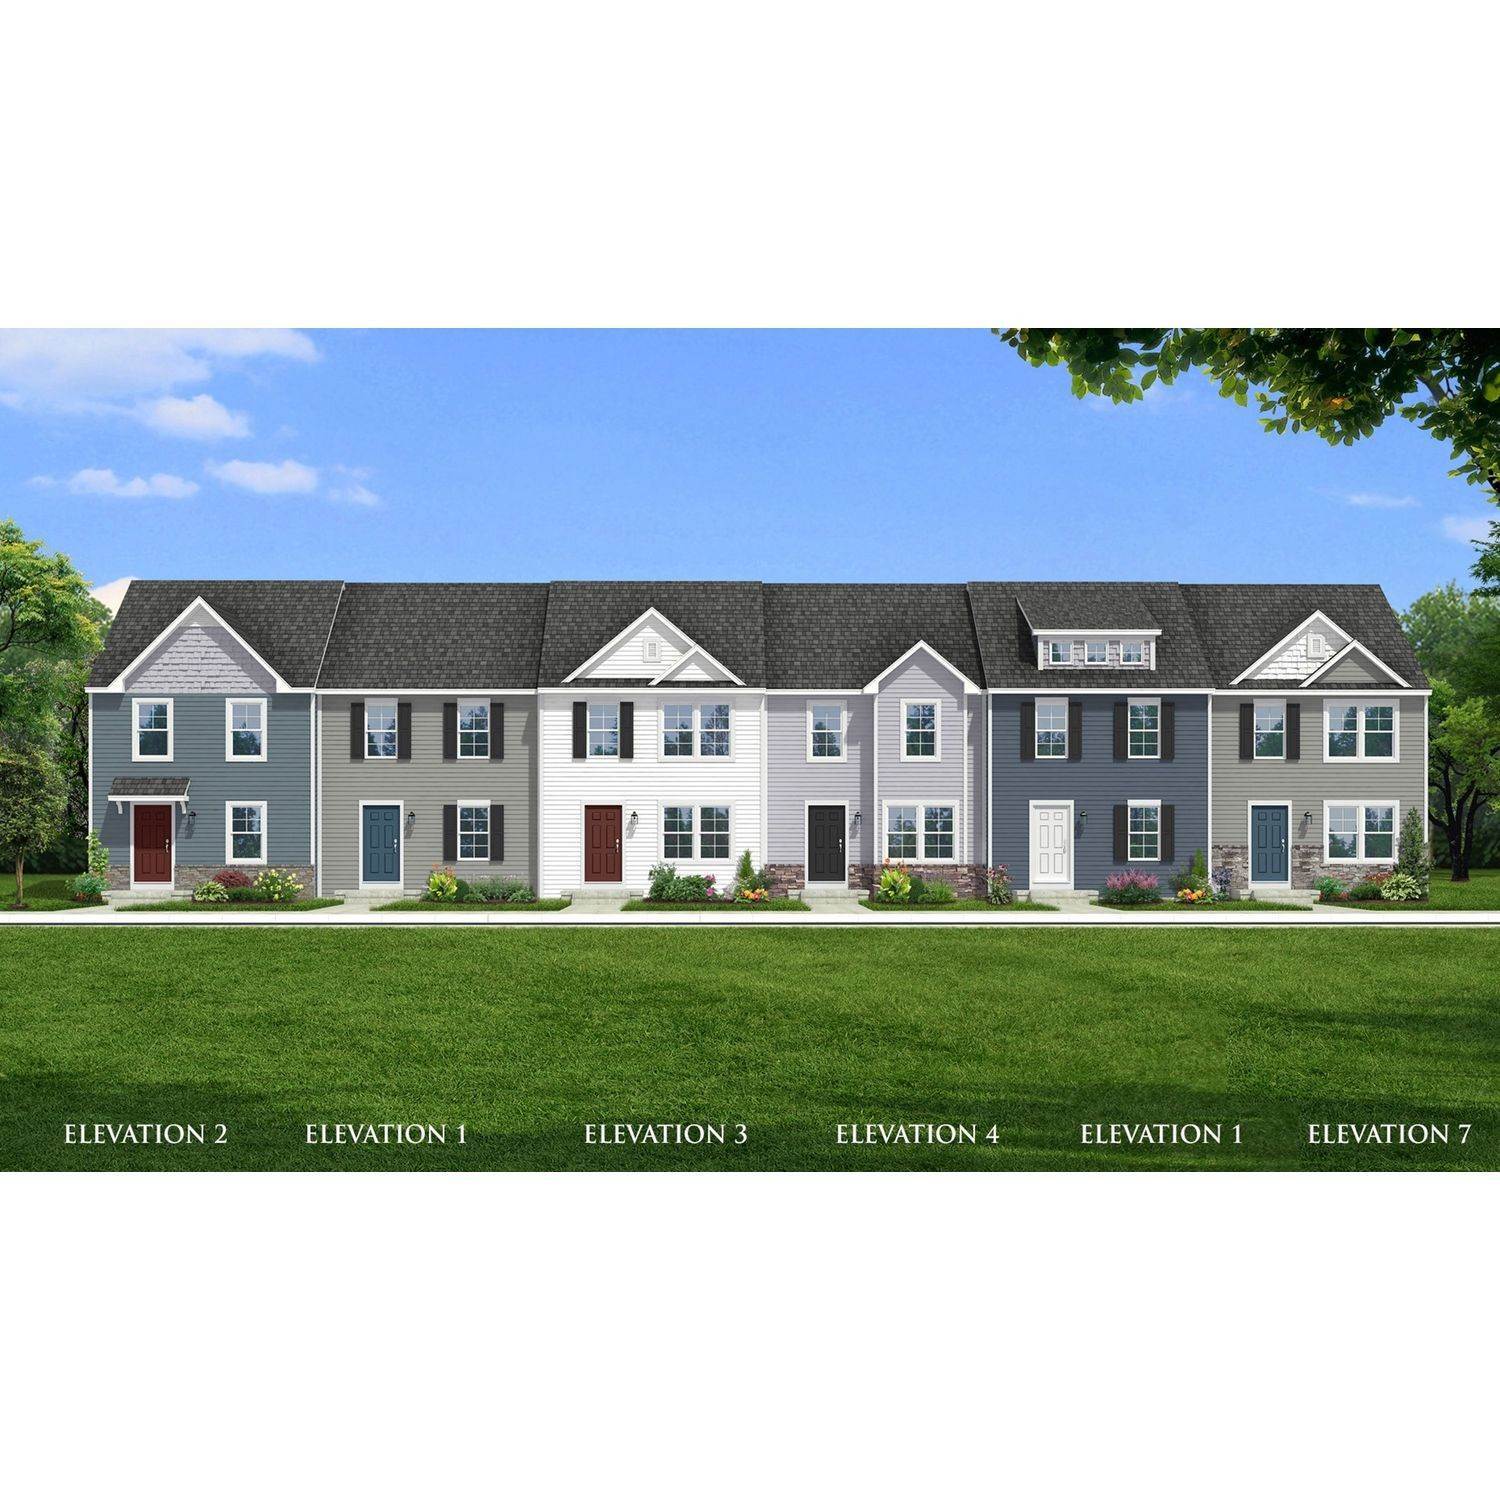 15. 16 Loblolly Drive, Bunker Hill, WV 25413에 Whispering Pines Townhomes 건물